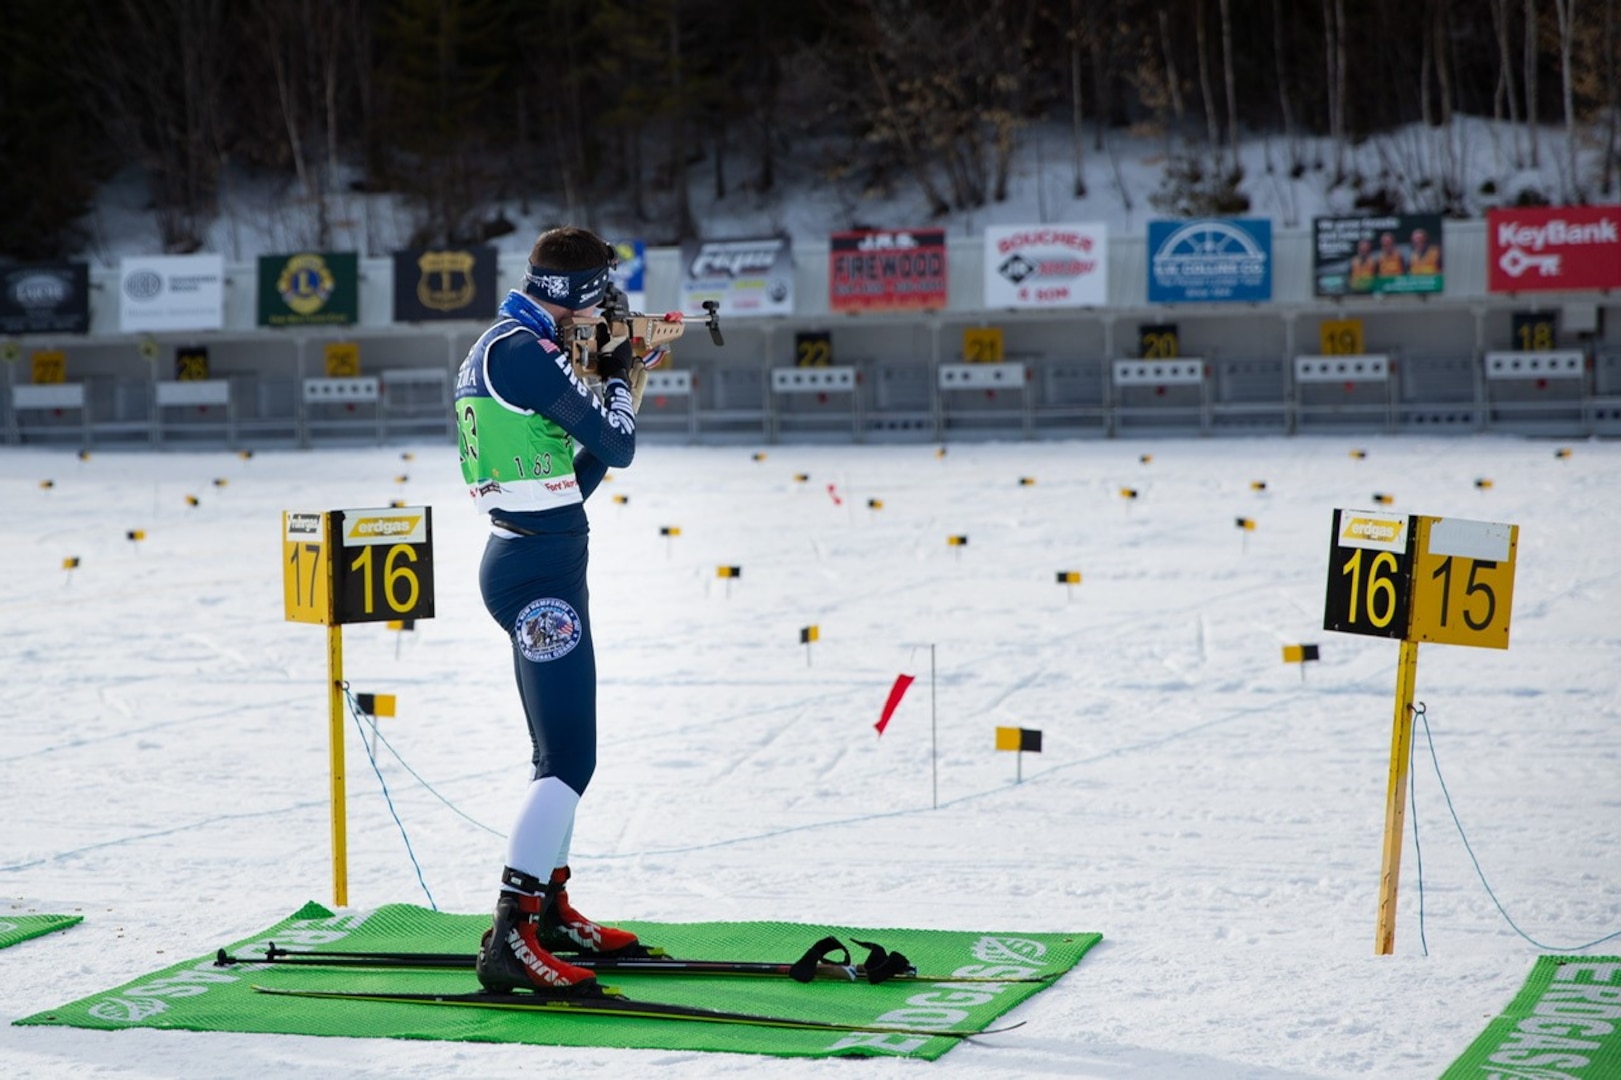 Spc. Thomas Echelberger shoots at the Biathlon Spring Fling on March 3, 2021, at Fort Kent, Maine. Echelberger placed sixth out of 35 competitors. (Courtesy photo)